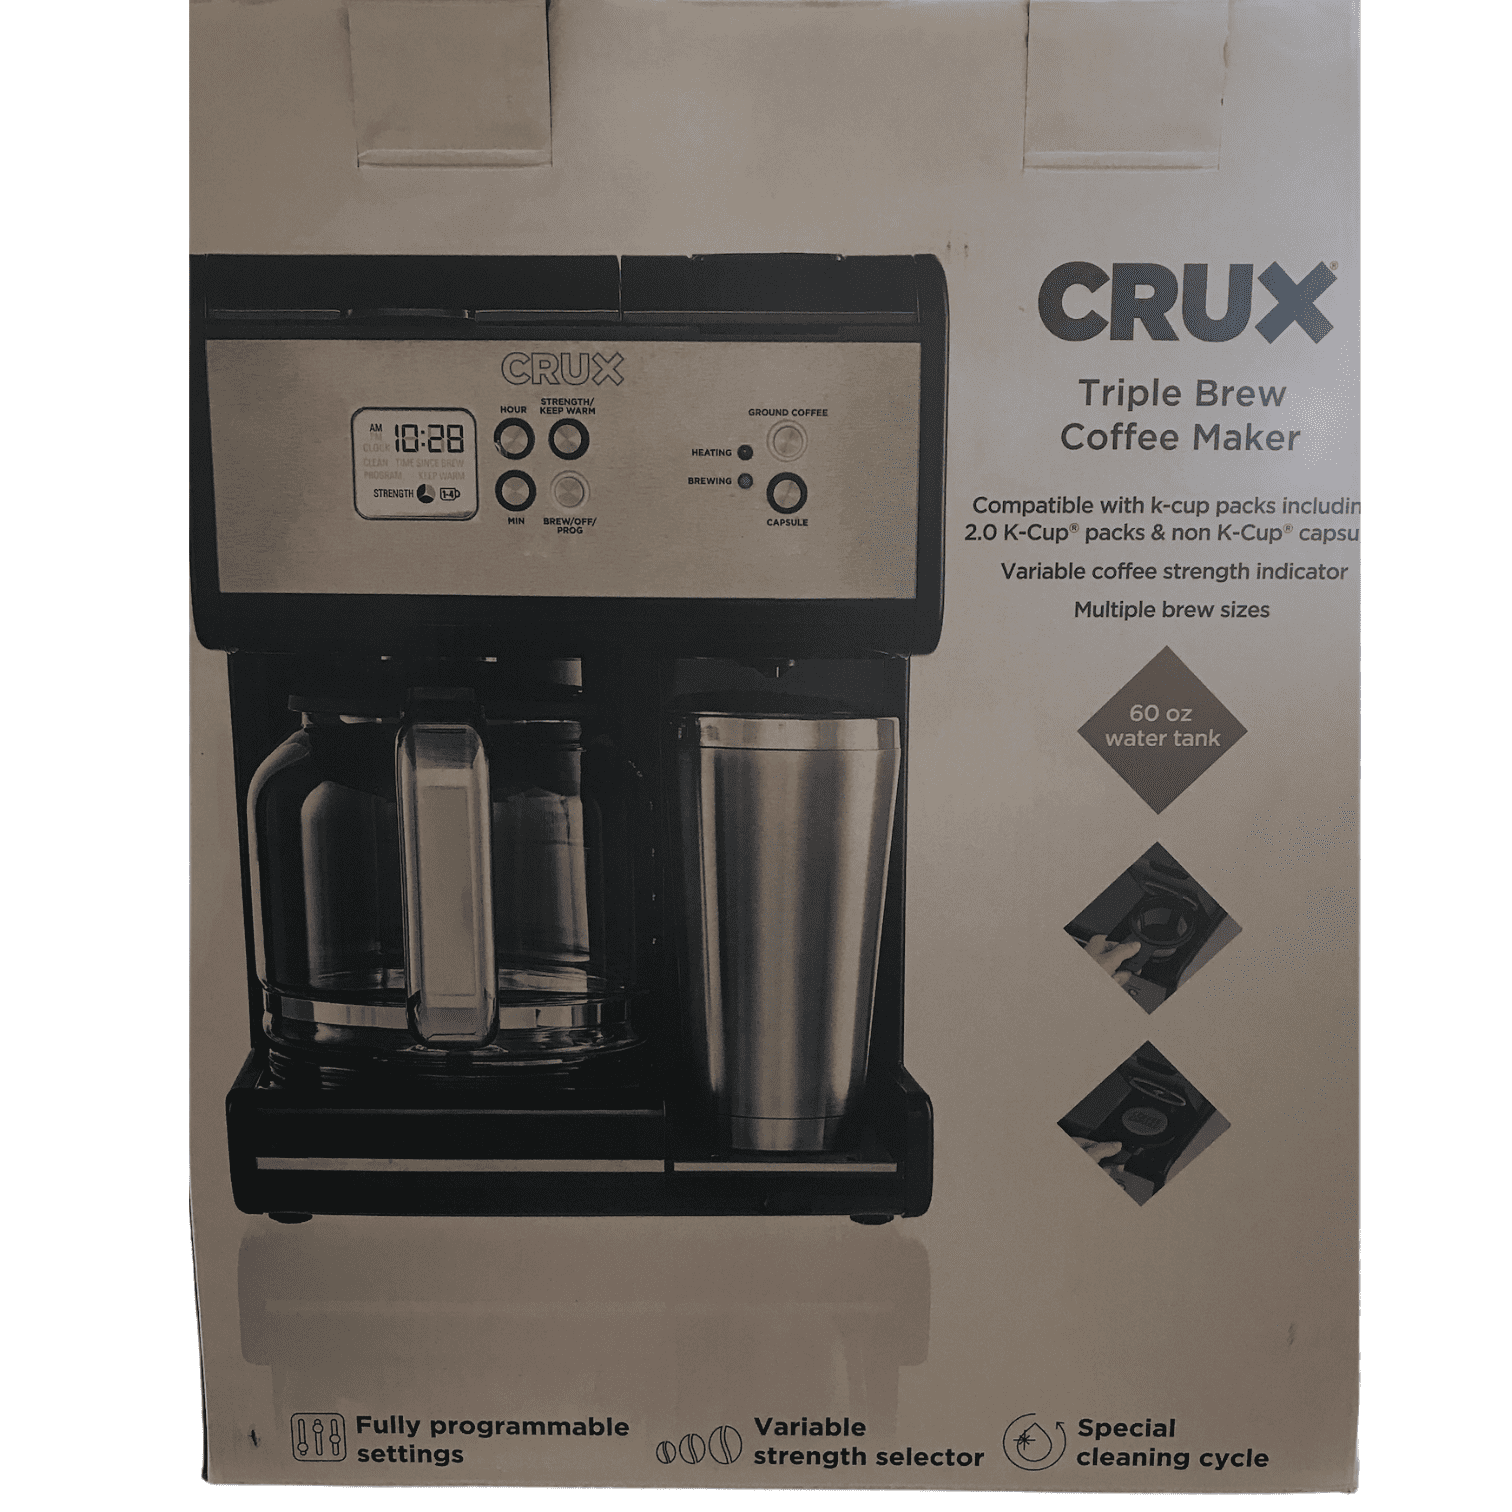 CRUX Artisan Series Coffee Maker - New for Sale in West Hollywood